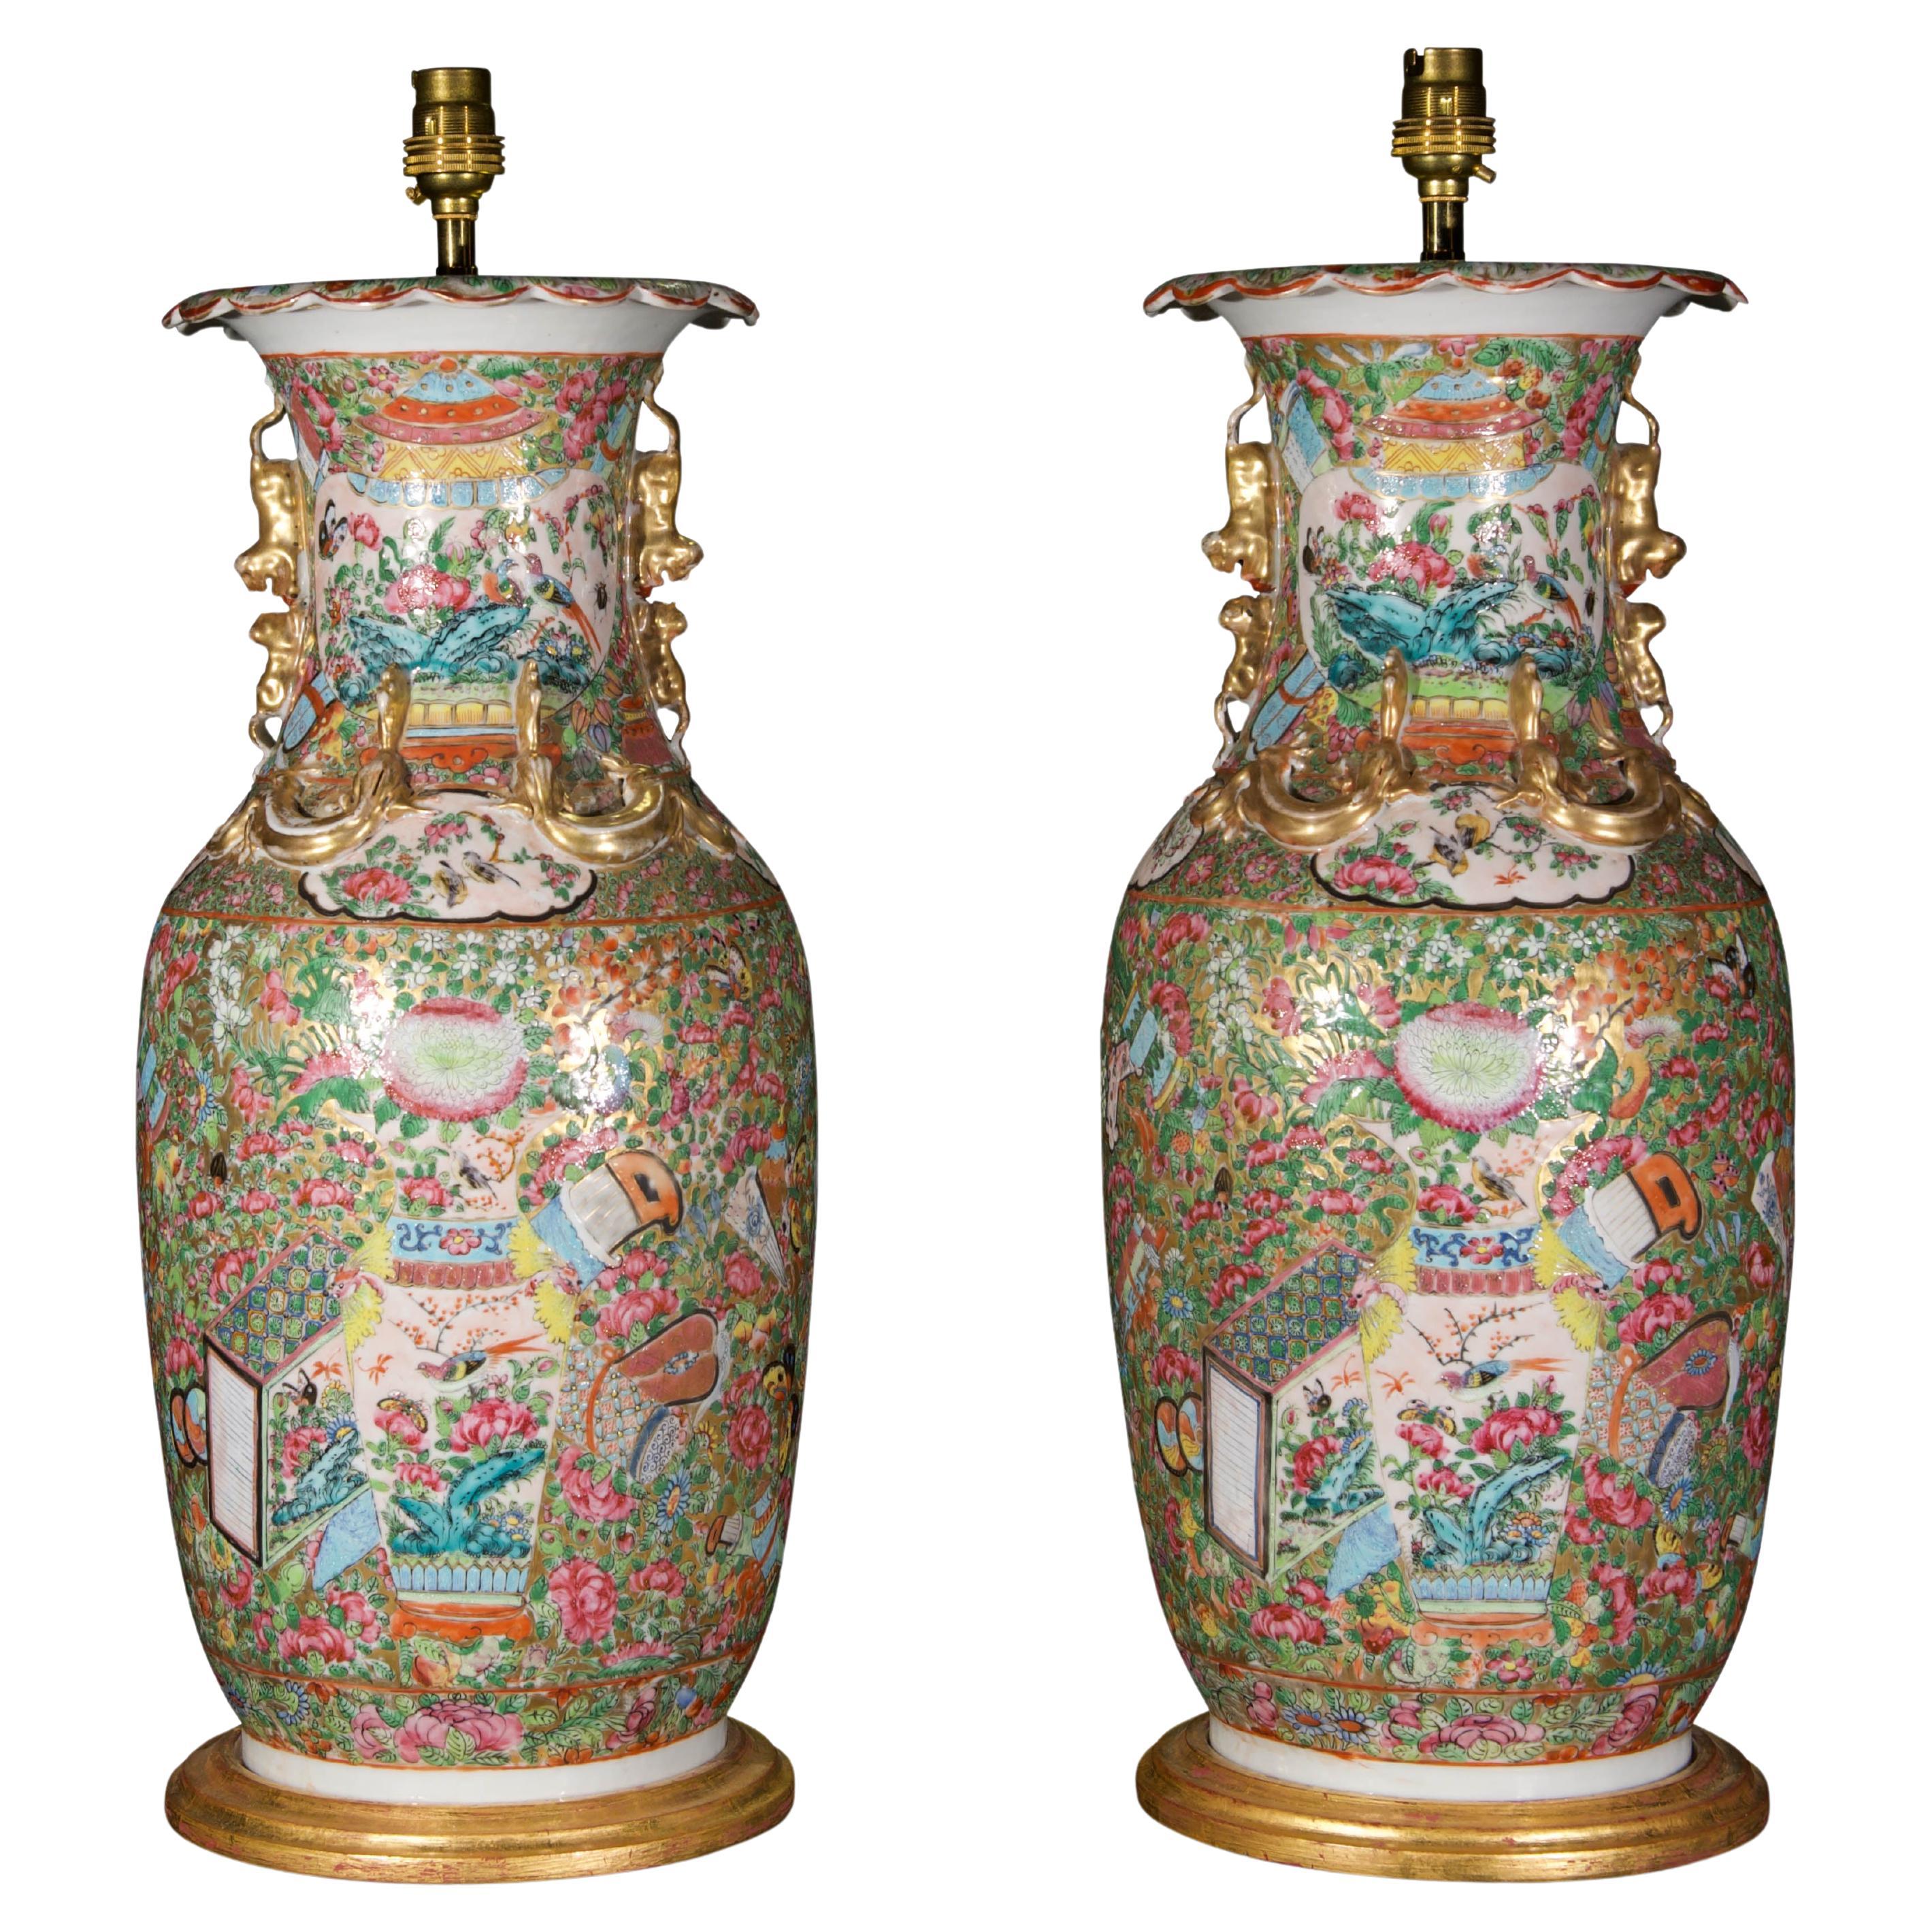 Pair of 19th Century Chinese Canton Baluster Porcelain Antique Table Lamps For Sale